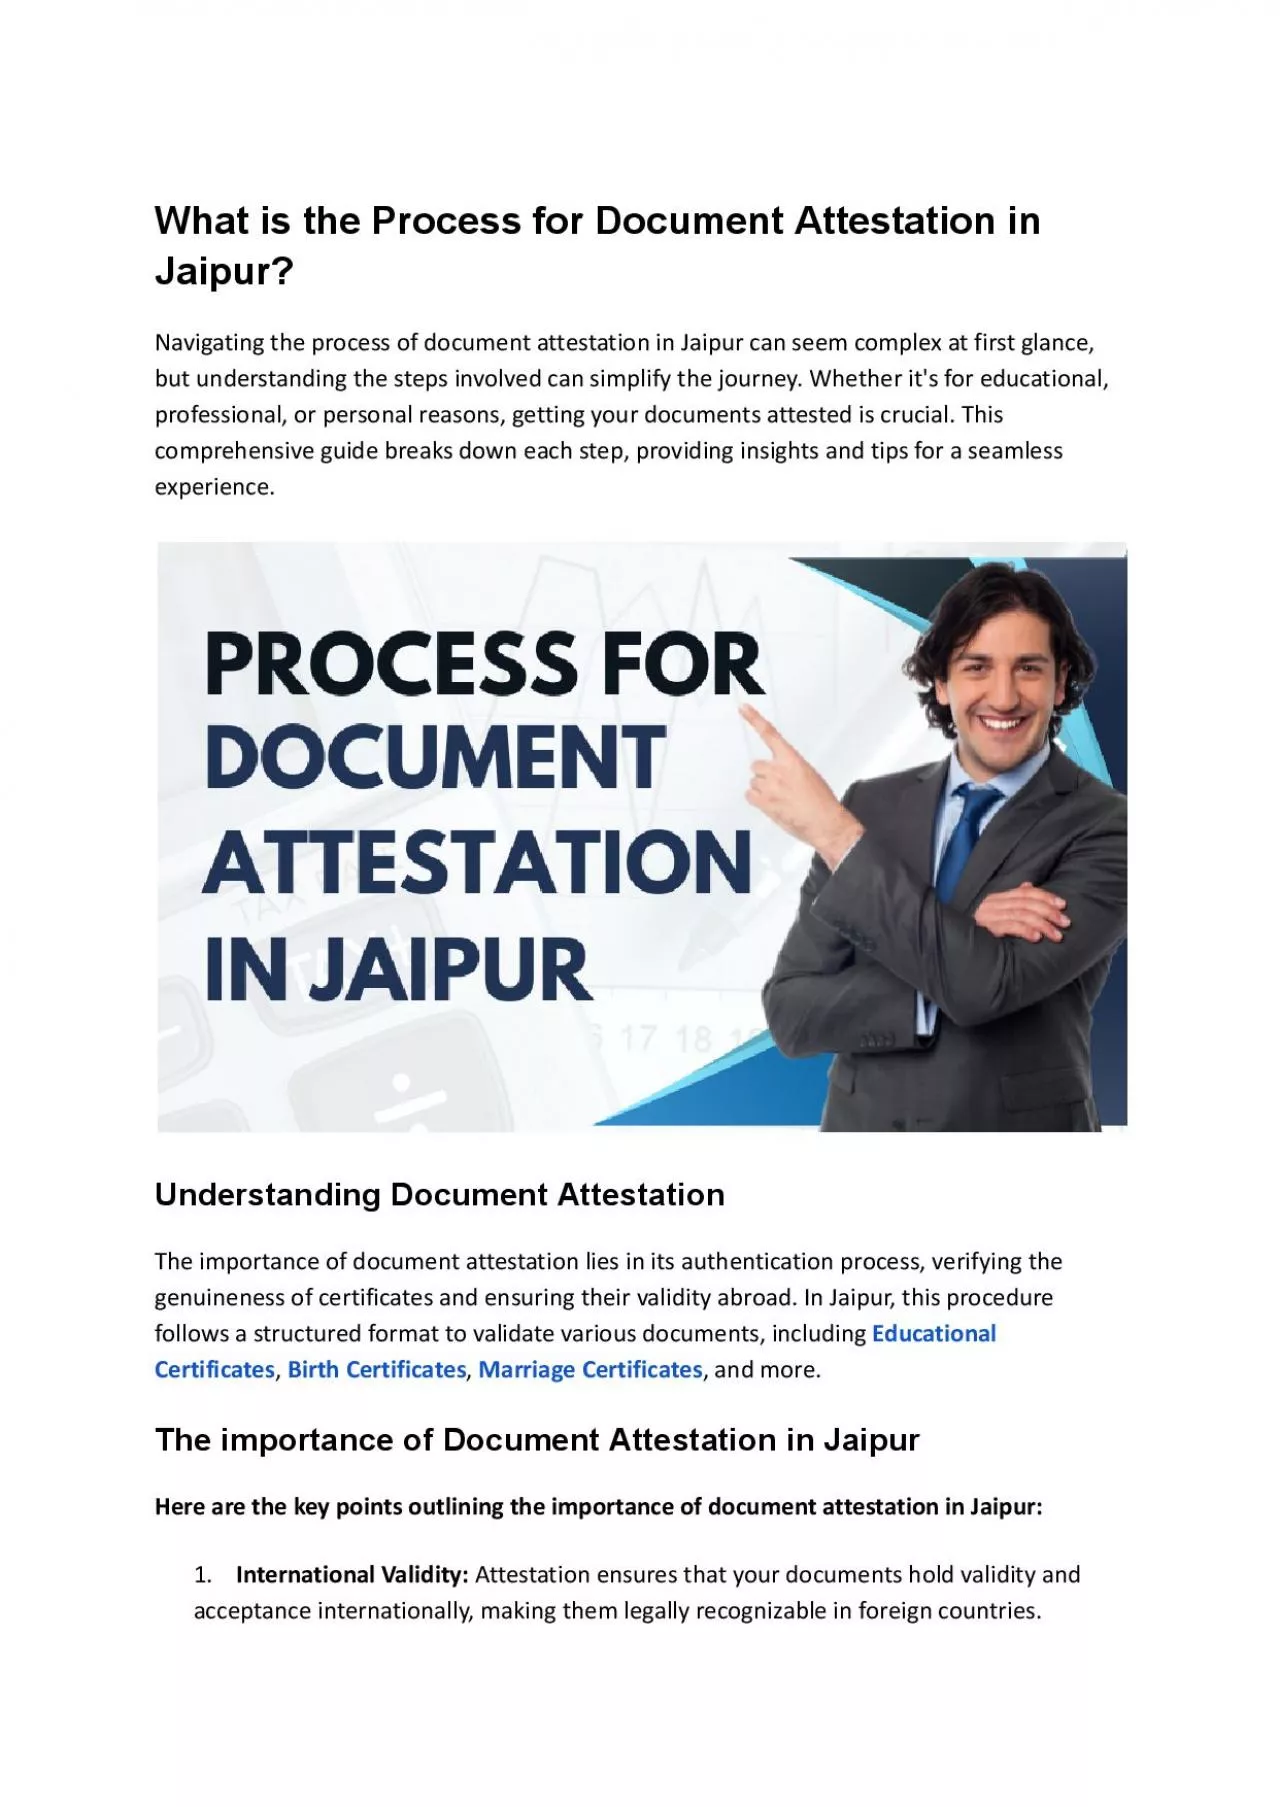 Process for Document Attestation in Jaipur